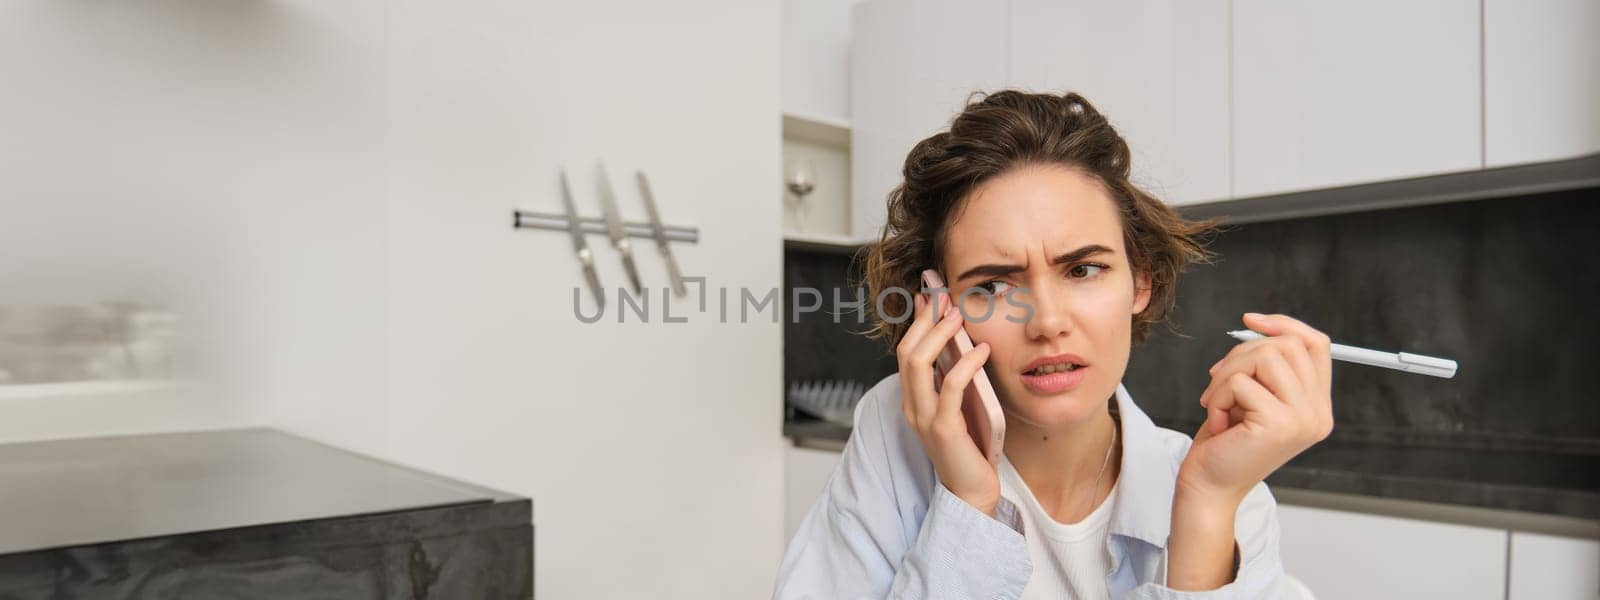 Portrait of woman having complicated conversation, holding smartphone, frowning with frustrated, confused face, holding pen.